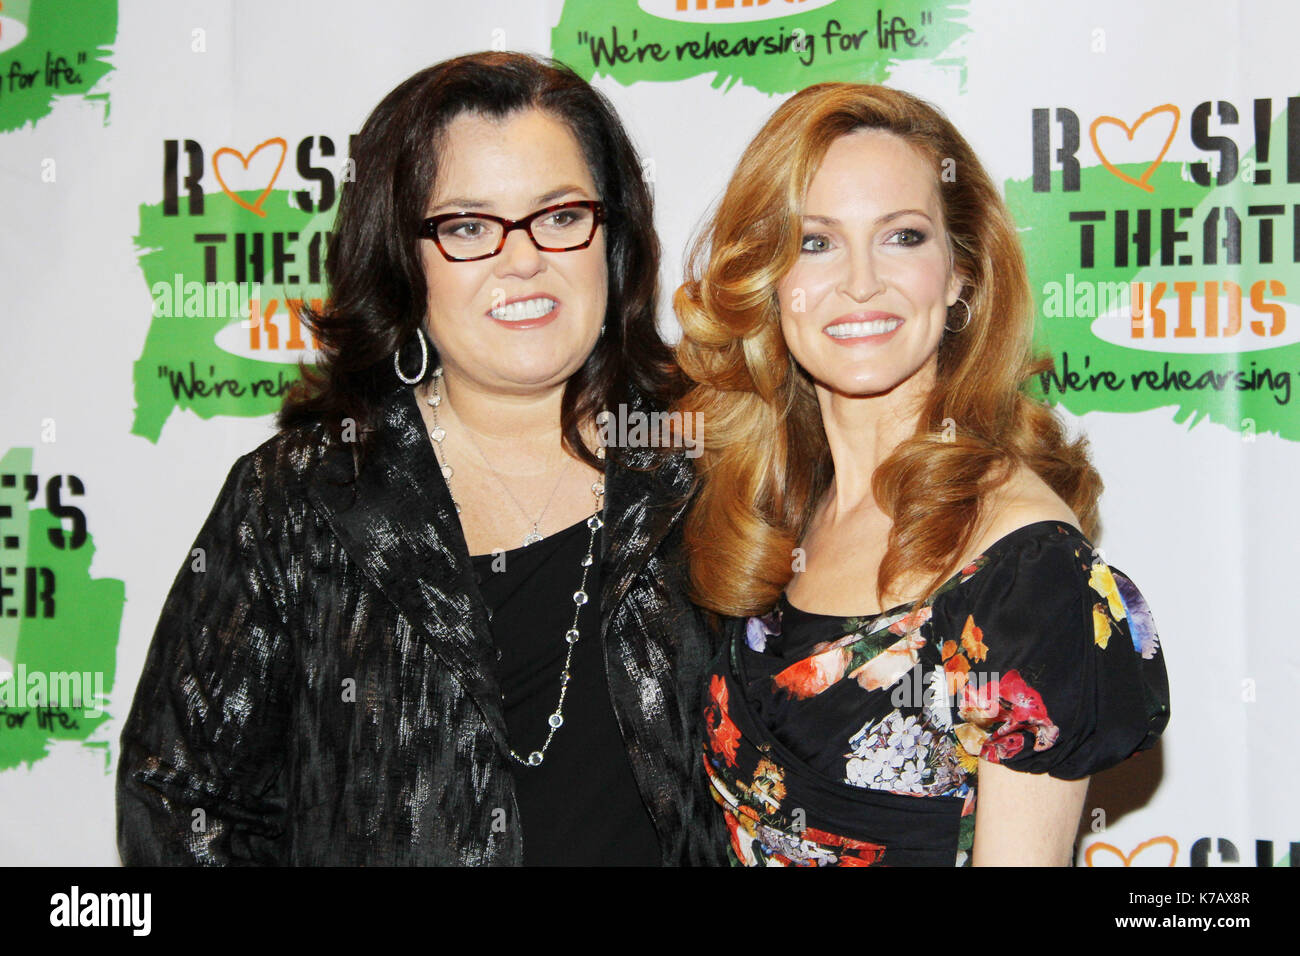 New York, NY, USA. 15th Oct, 2017. Rosie O'Donnell and Michelle Rounds at Rosie O'Donnell's Annual Building Dreams For Kids Gala at The New York Marriott Marquis on October 15, 2012 in New York City. Credit: Felicia Franco/Media Punch I Nc./Alamy Live News Stock Photo